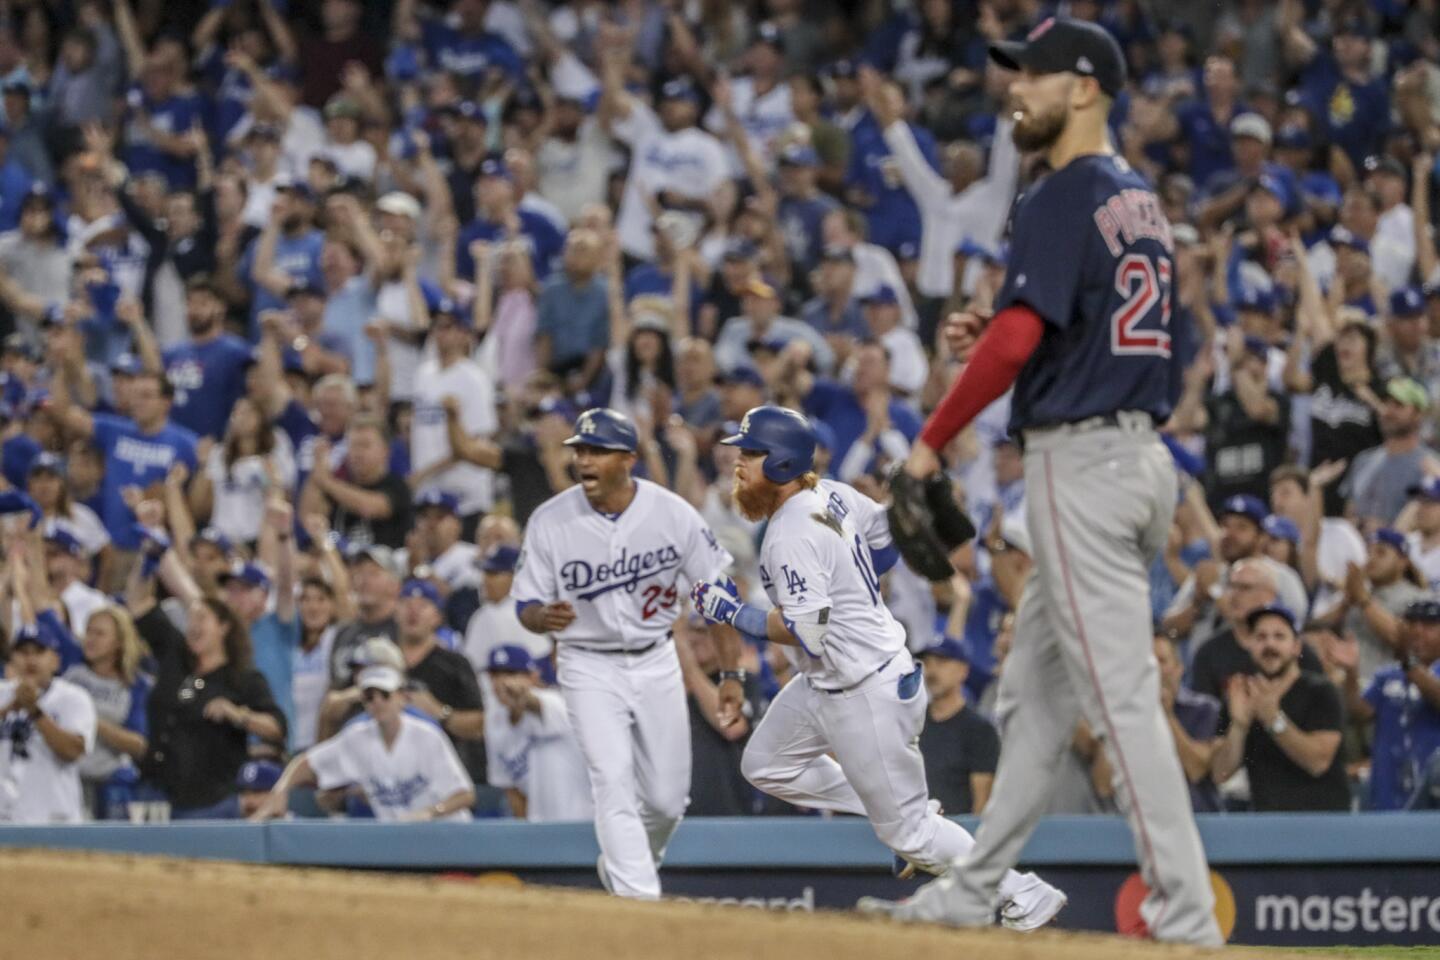 As Red Sox pitcher Rick Porcello watches, Dodger Justin Turner doubles in the third inning.